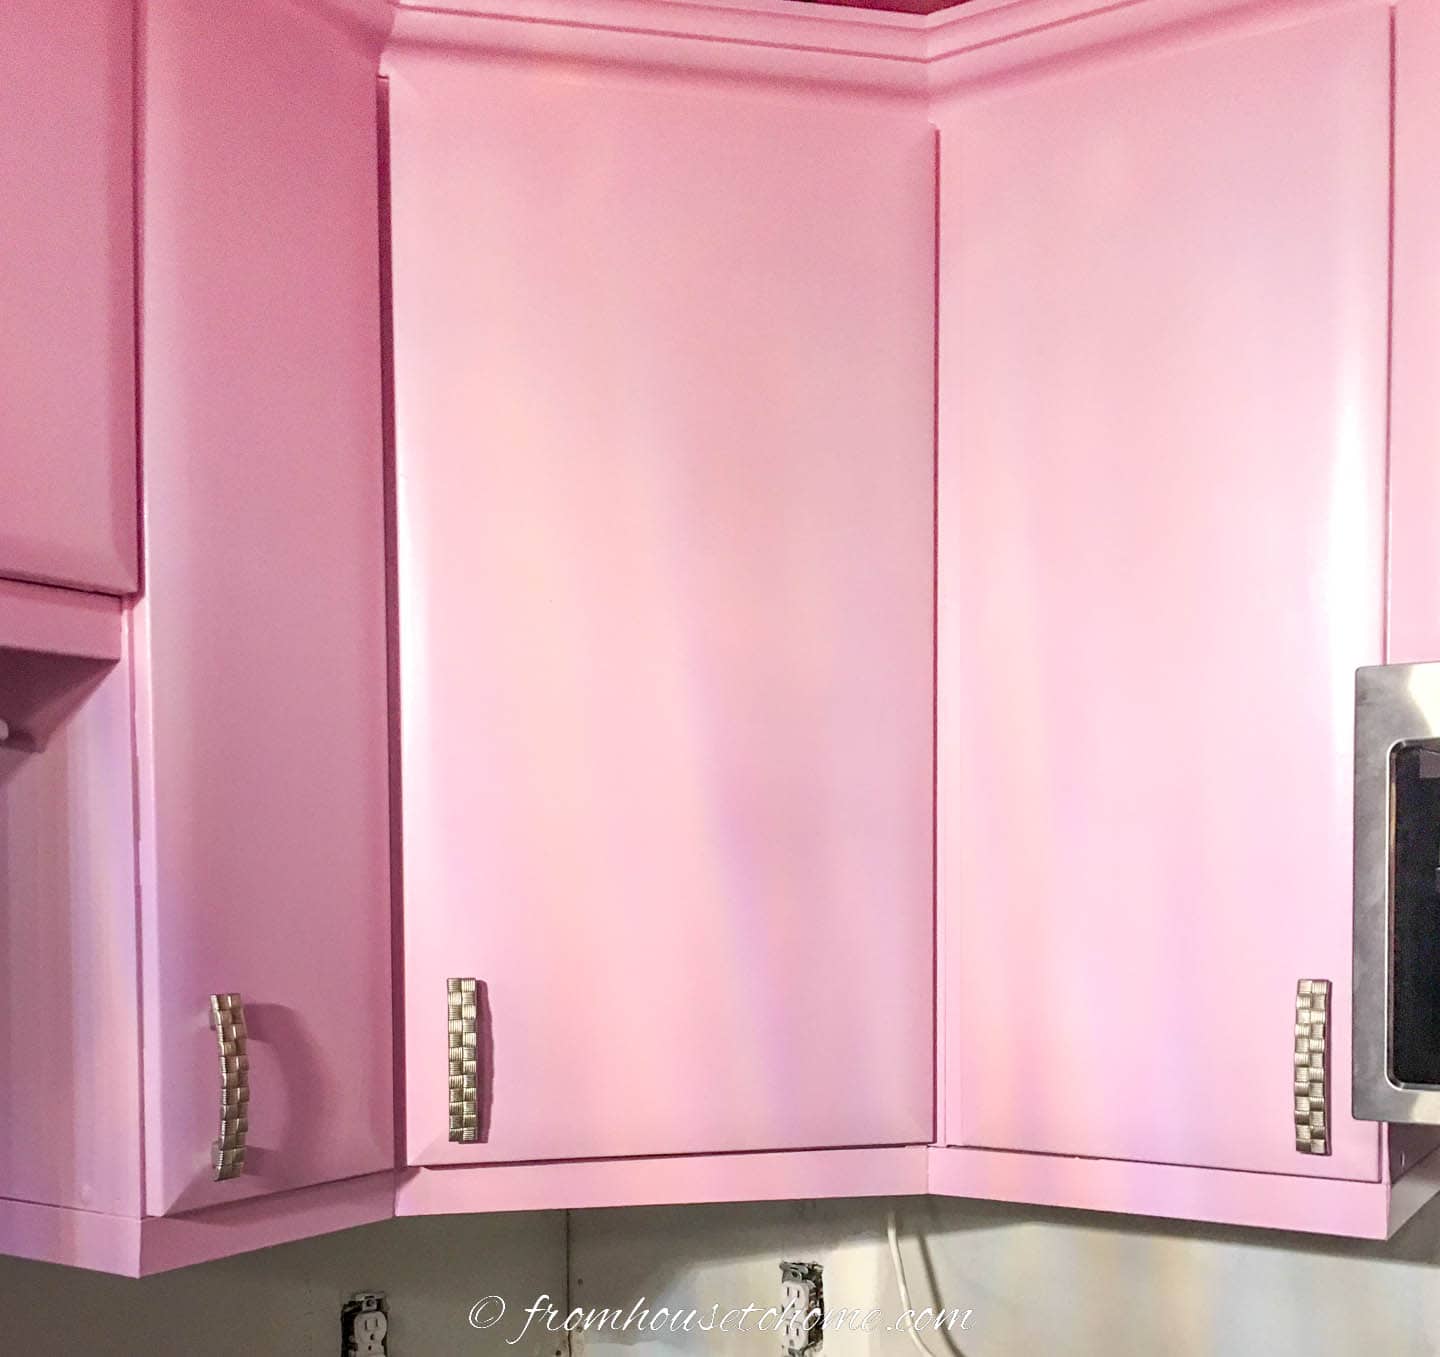 Pink upper kitchen cabinets with brushed pewter pulls